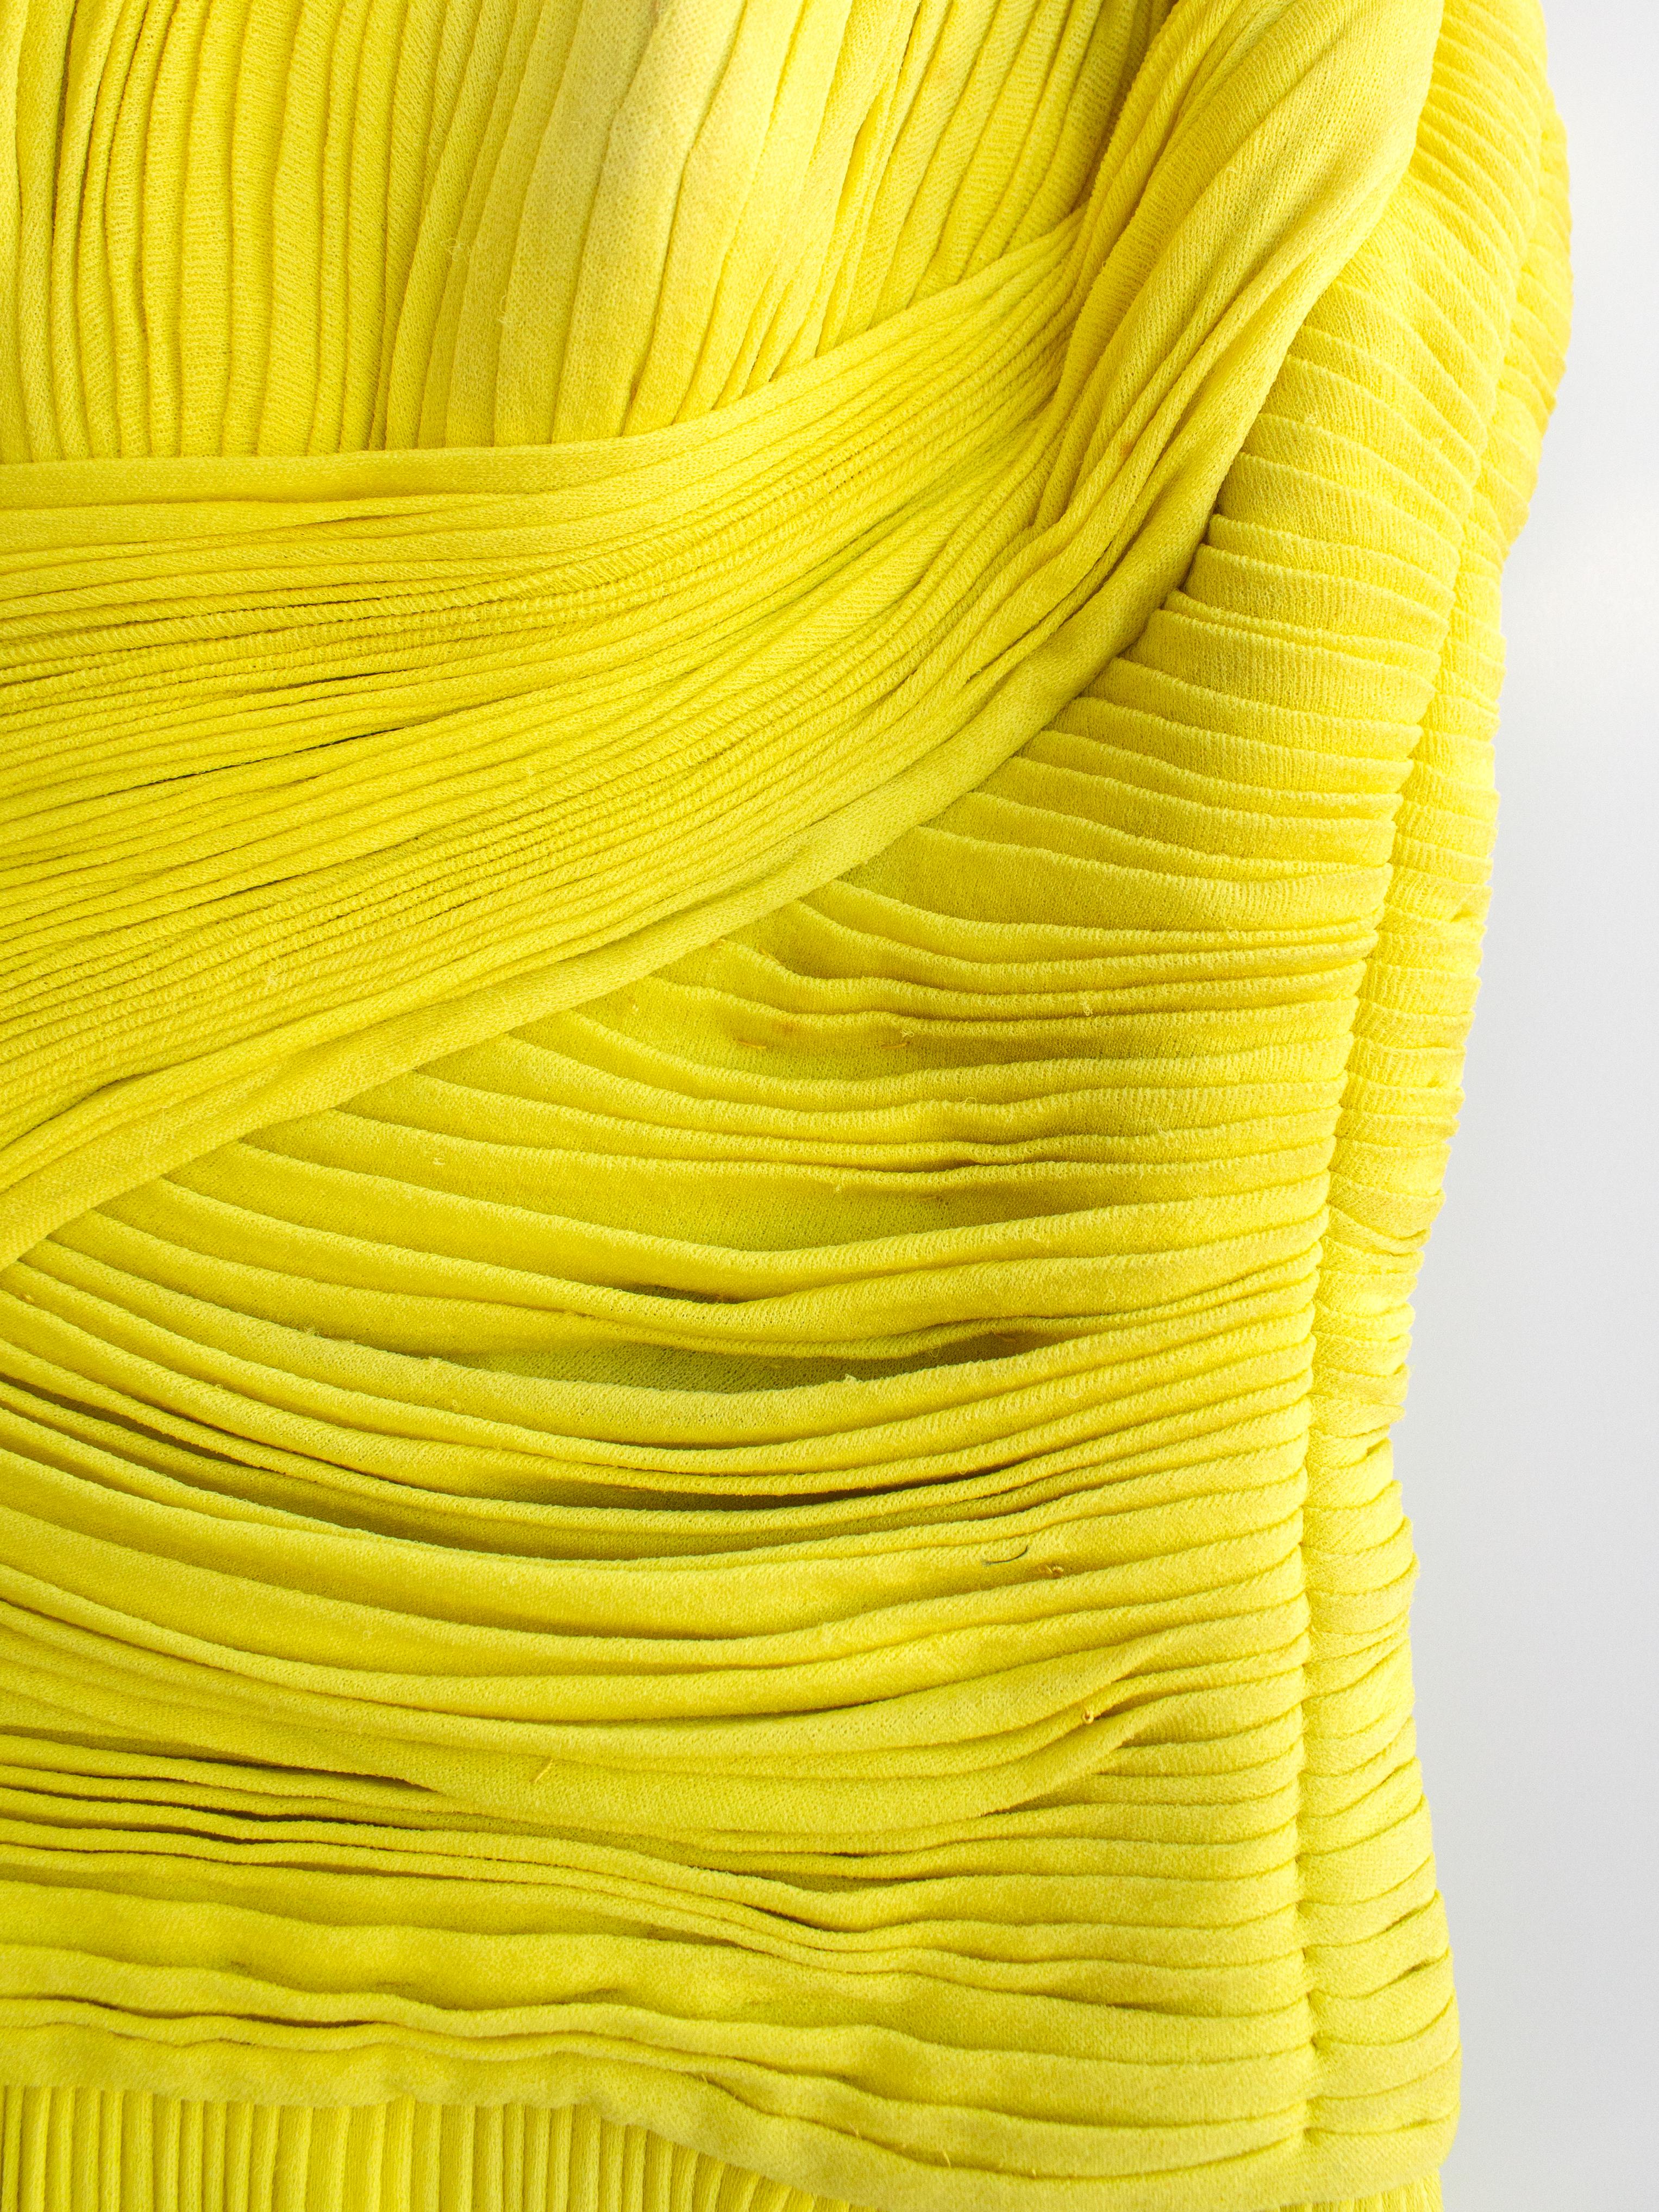 Madame Grès Haute Couture 1956 Pleated Chartreuse Yellow Jersey Hellenic Gown 6